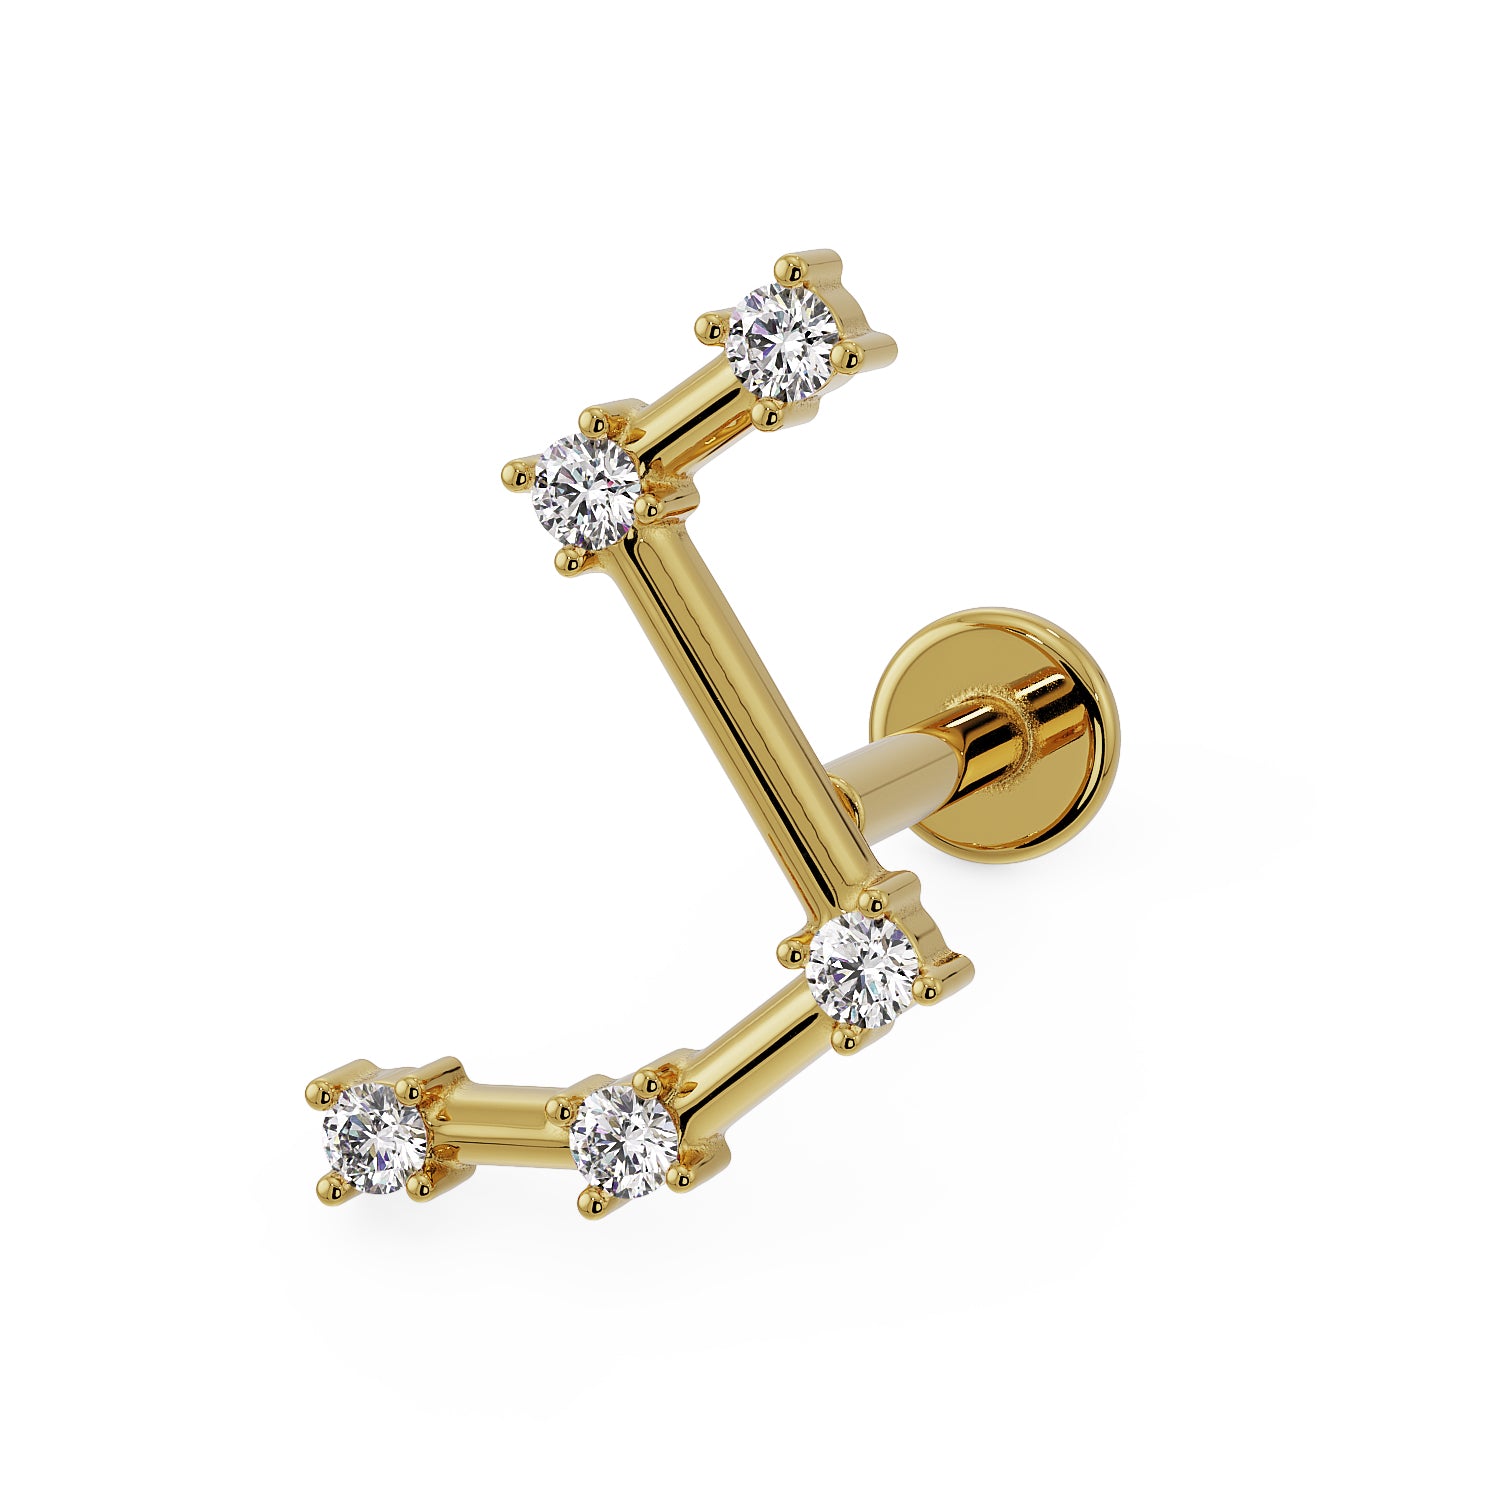 Aries Constellation 14k Gold Flat Back Earring